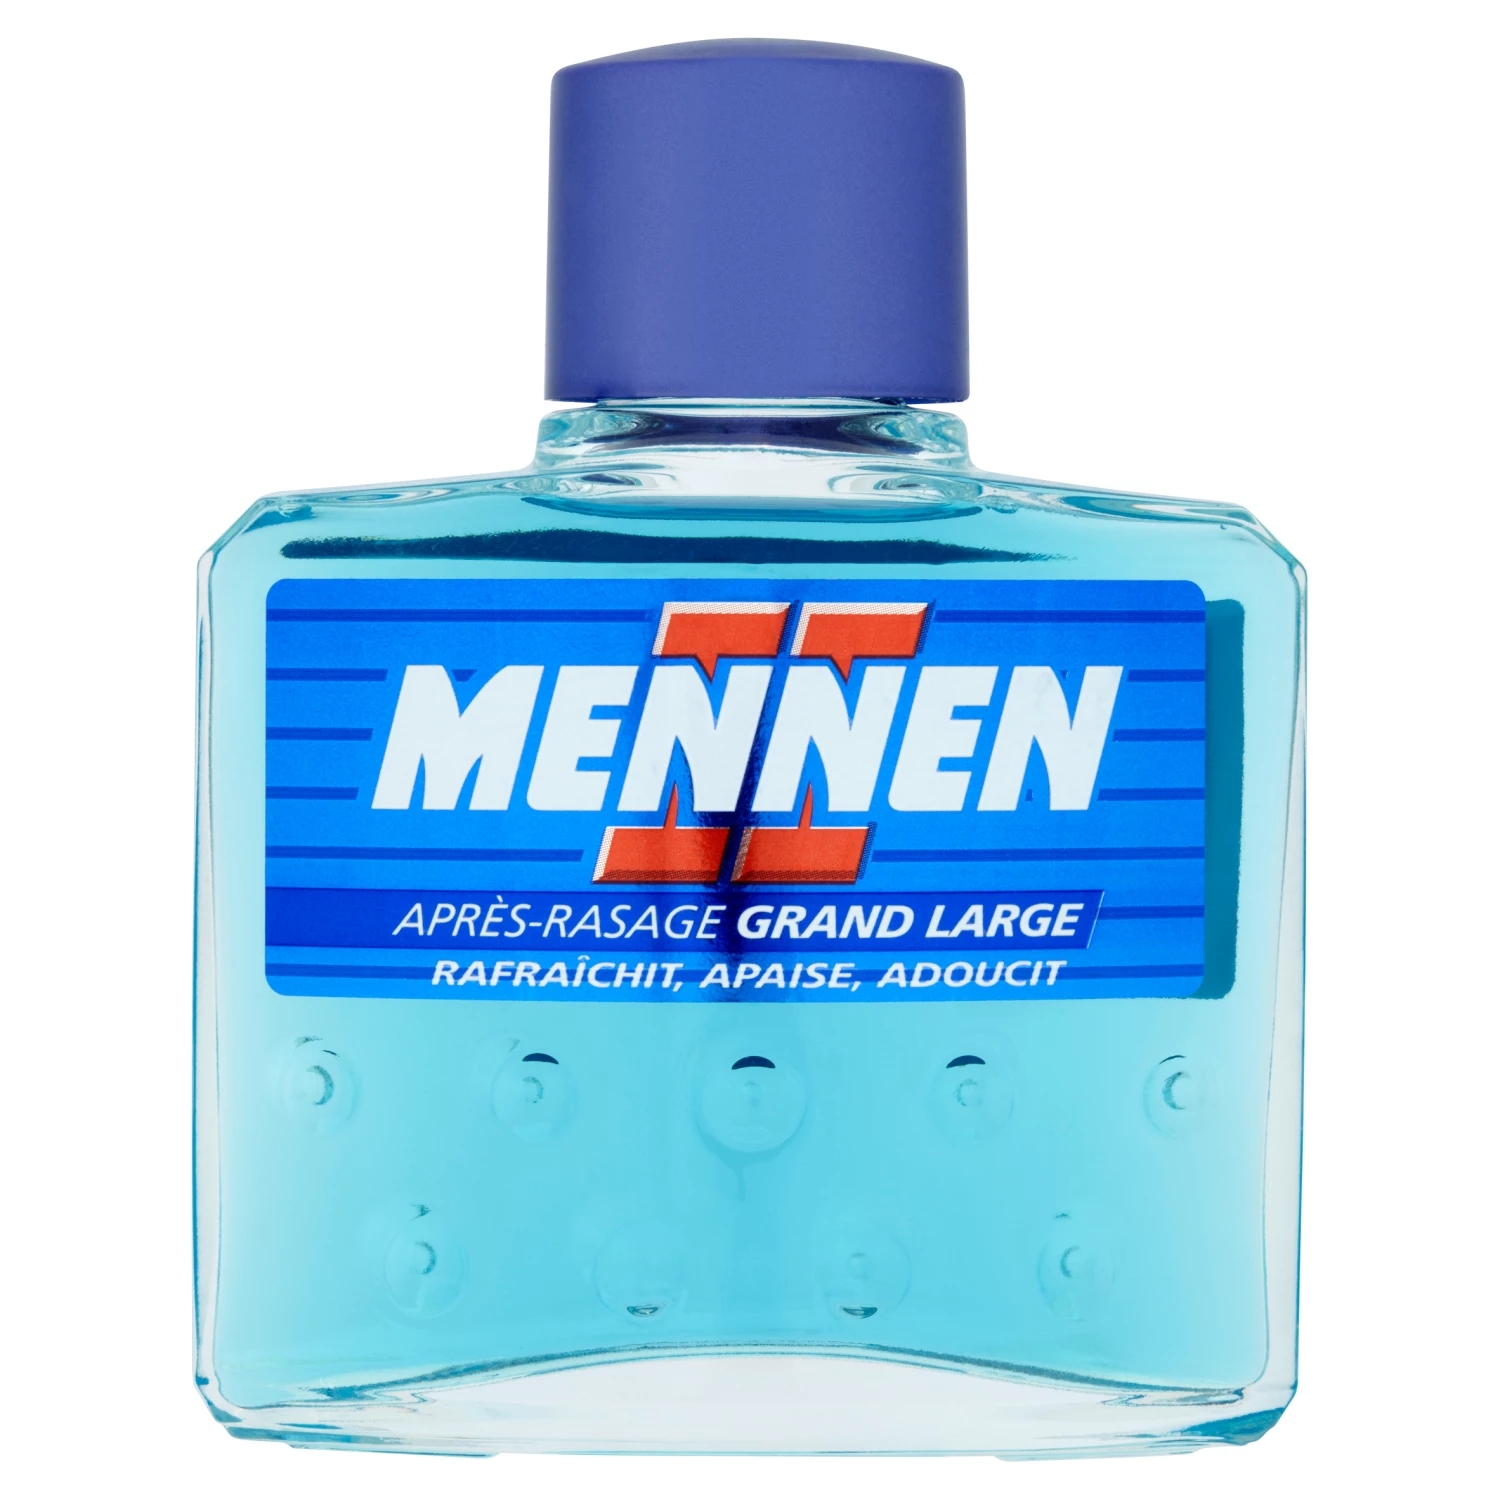 Grand Large Aftershave 125 ml - MENNEN